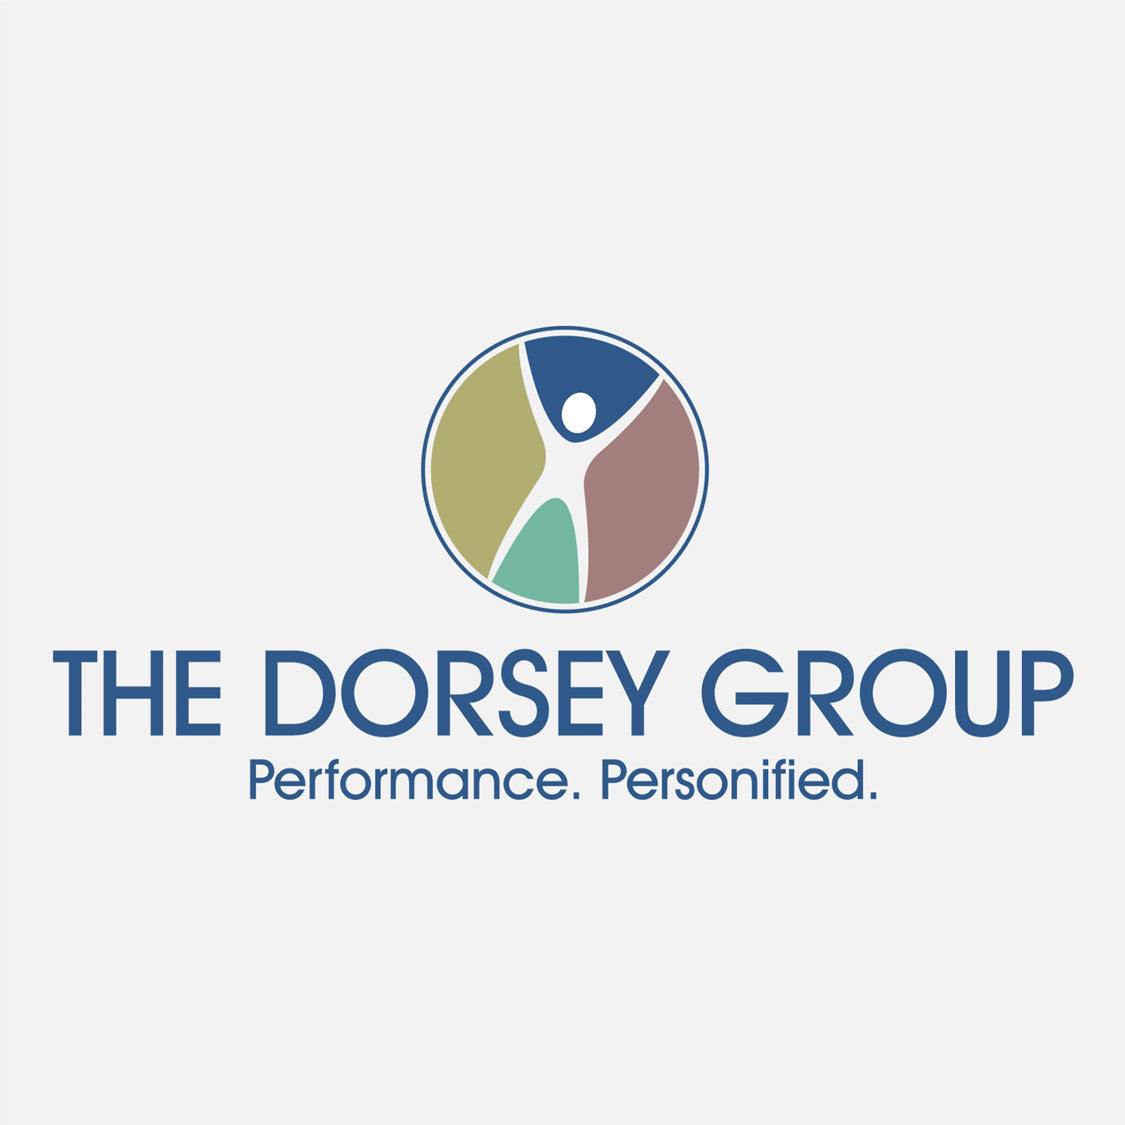 The Dorsey Group inspires people to peak performance – maximizing operational excellence for proven, sustainable business success. The logo is a colorful, fun graphic of a person with their arms raised.